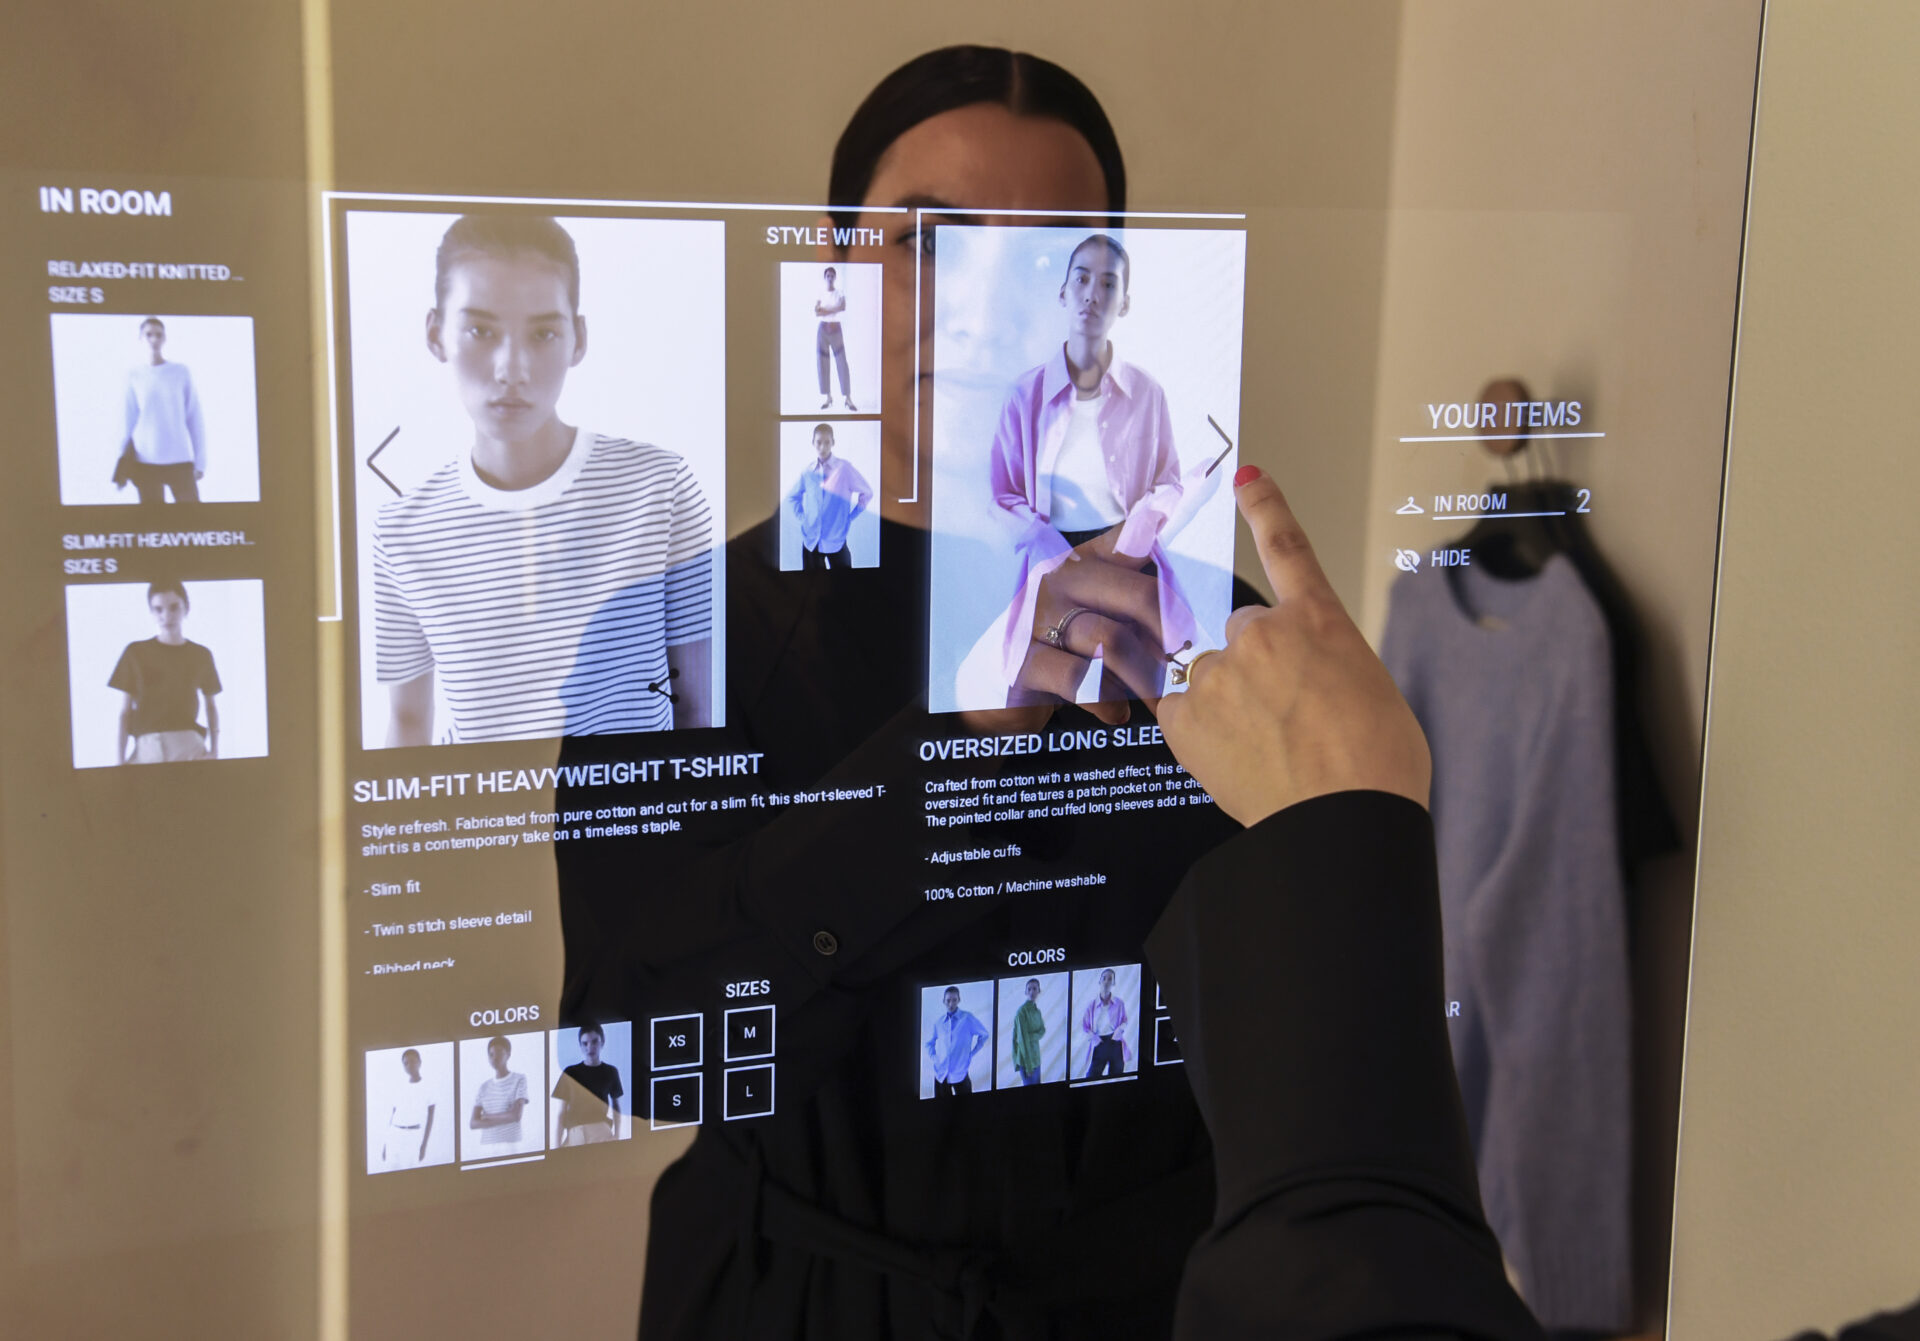 H&M Group tests new tech in US Cos stores - Inside Retail Asia